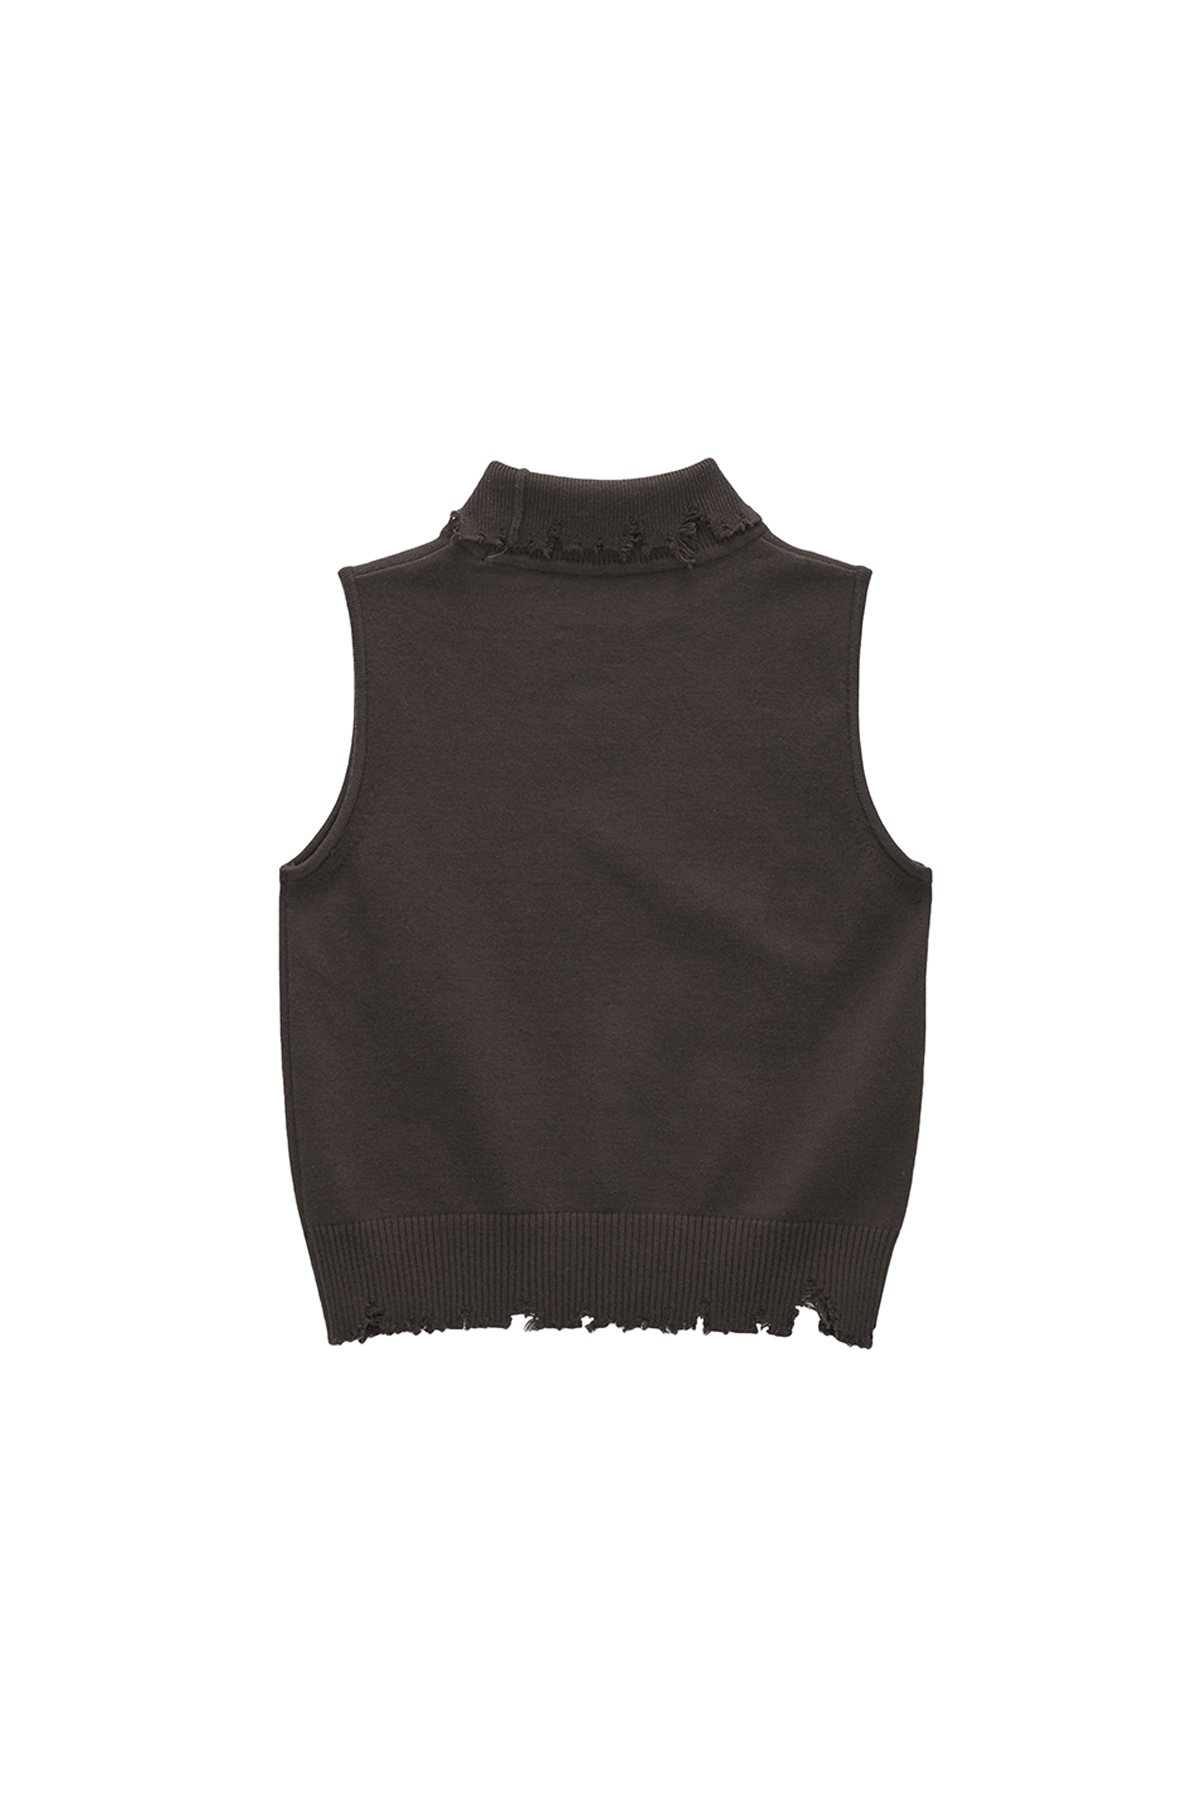 DAMAGE SLEEVELESS TURTLE NECK KNIT TOP IN BROWN